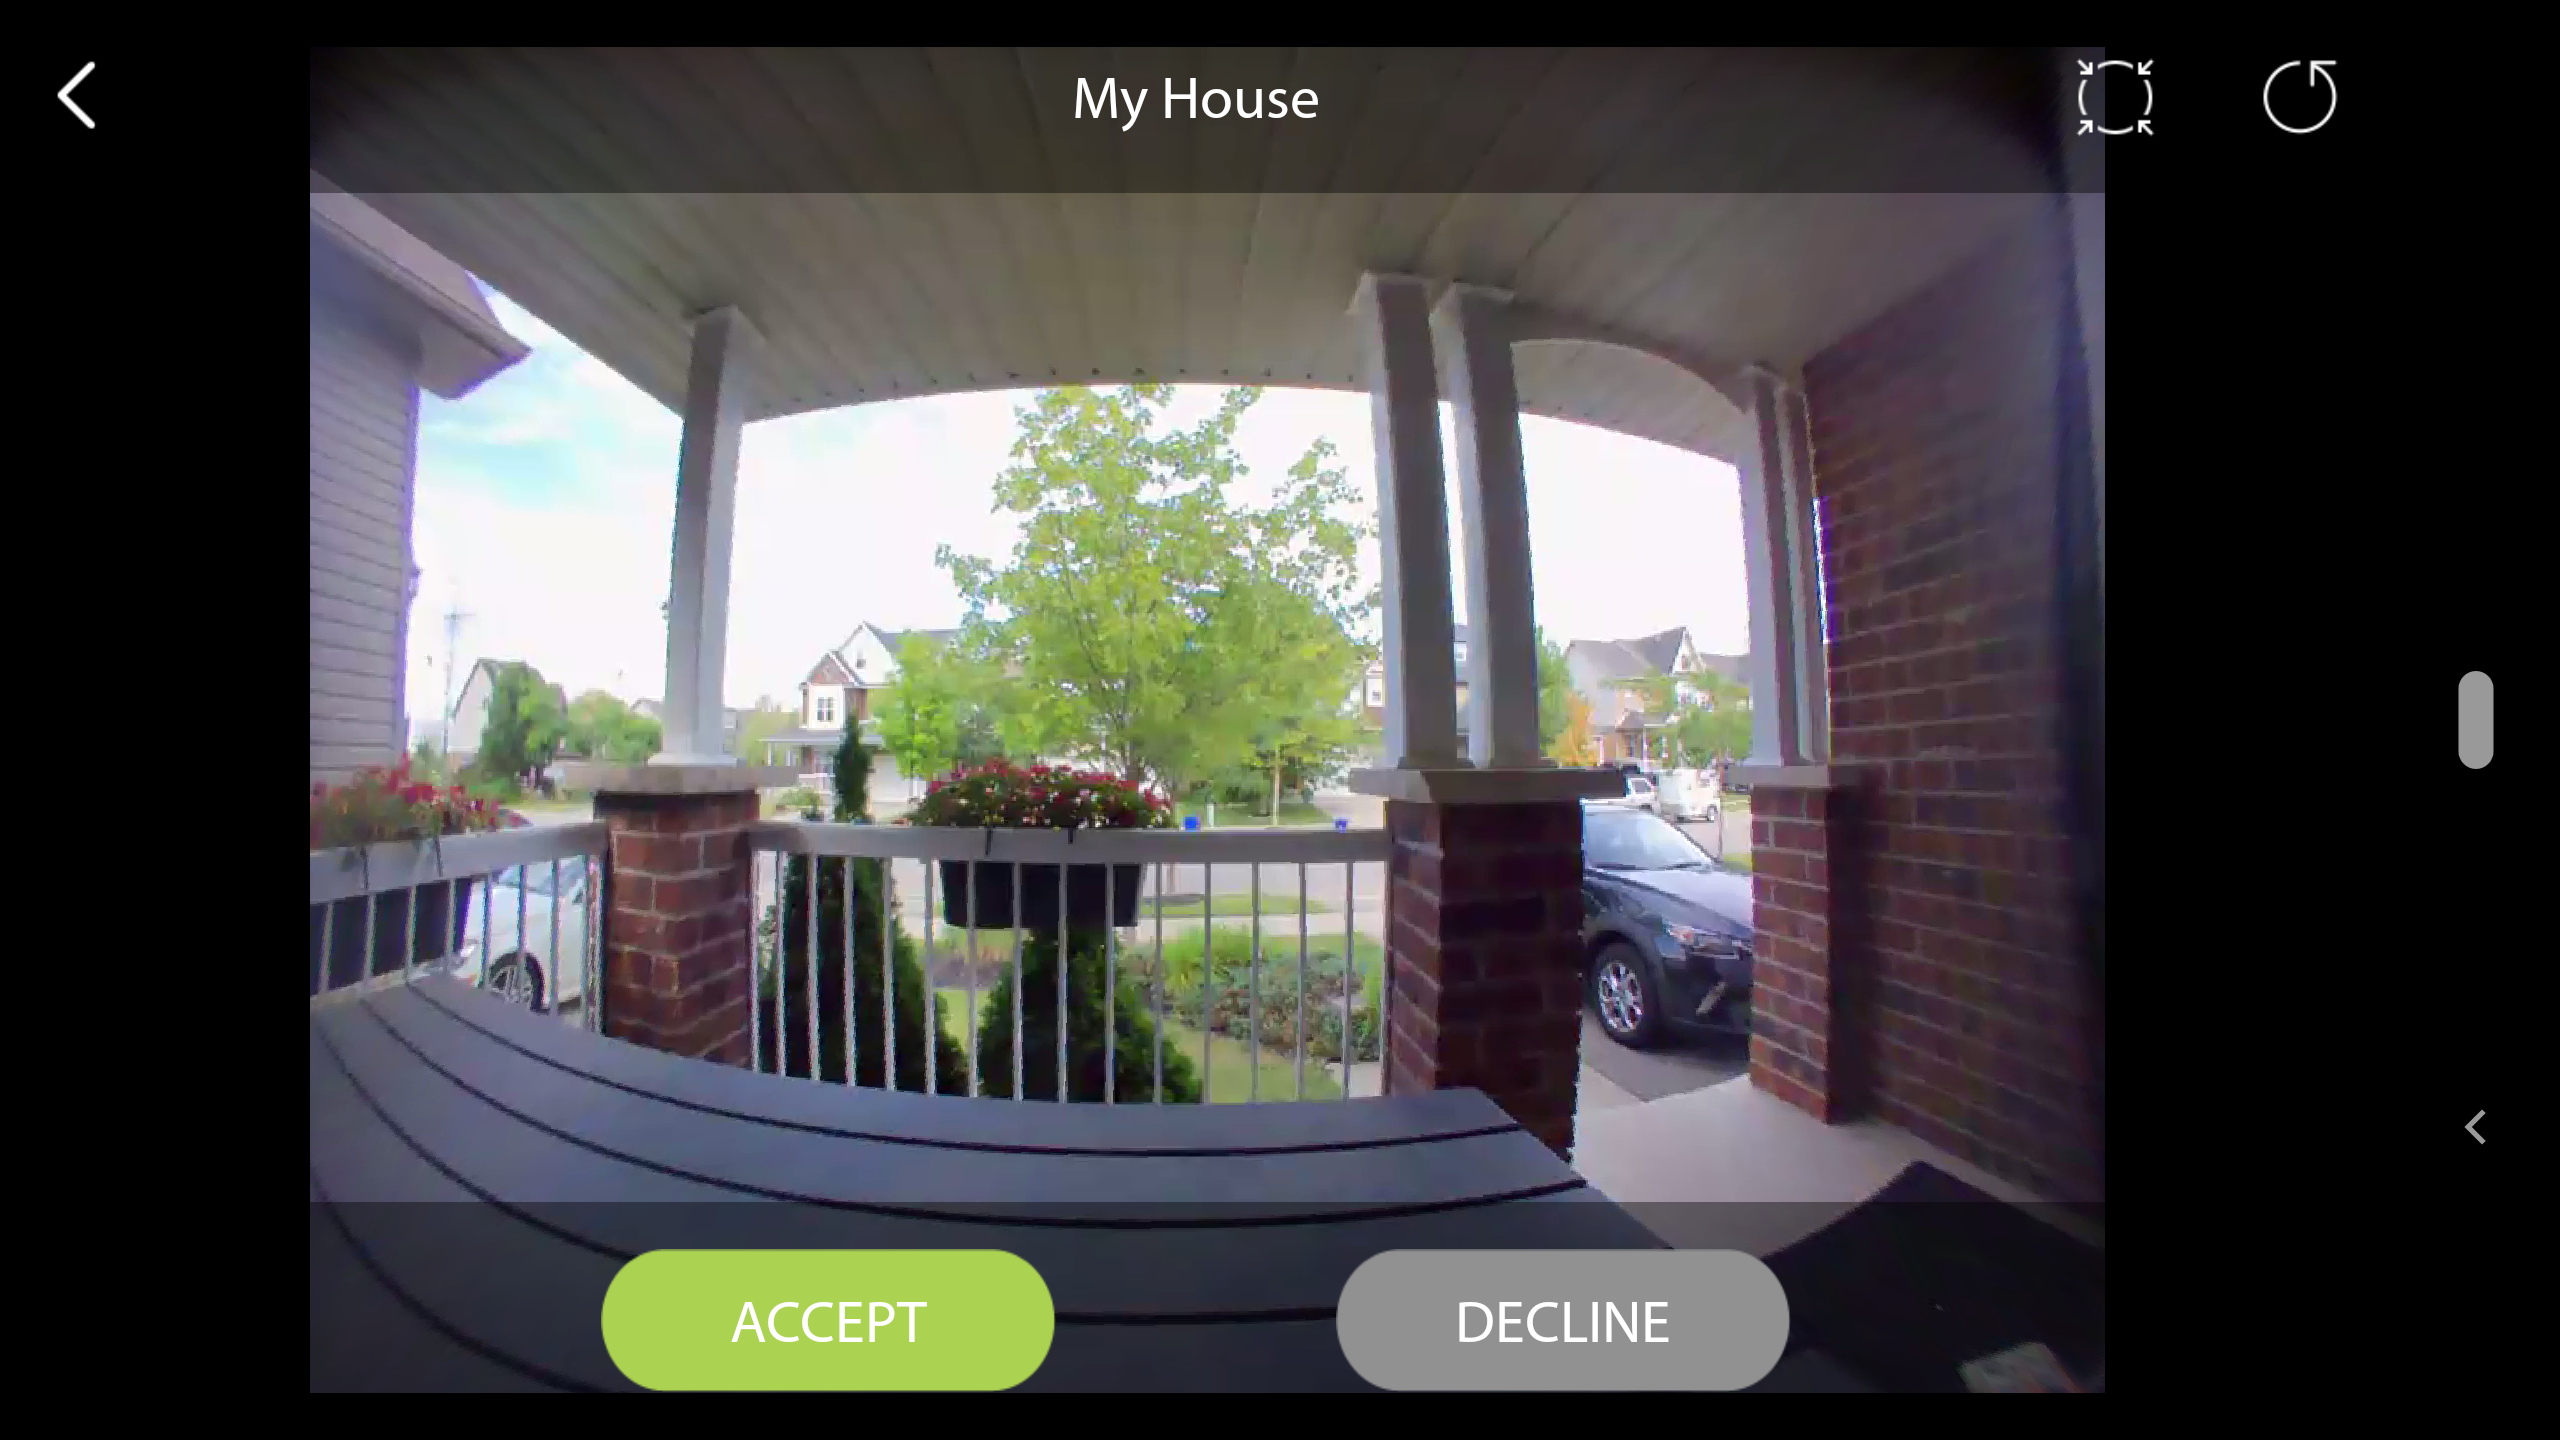 RemoBell W Wired Wi-Fi Video Doorbell Impressions | Digital Trends